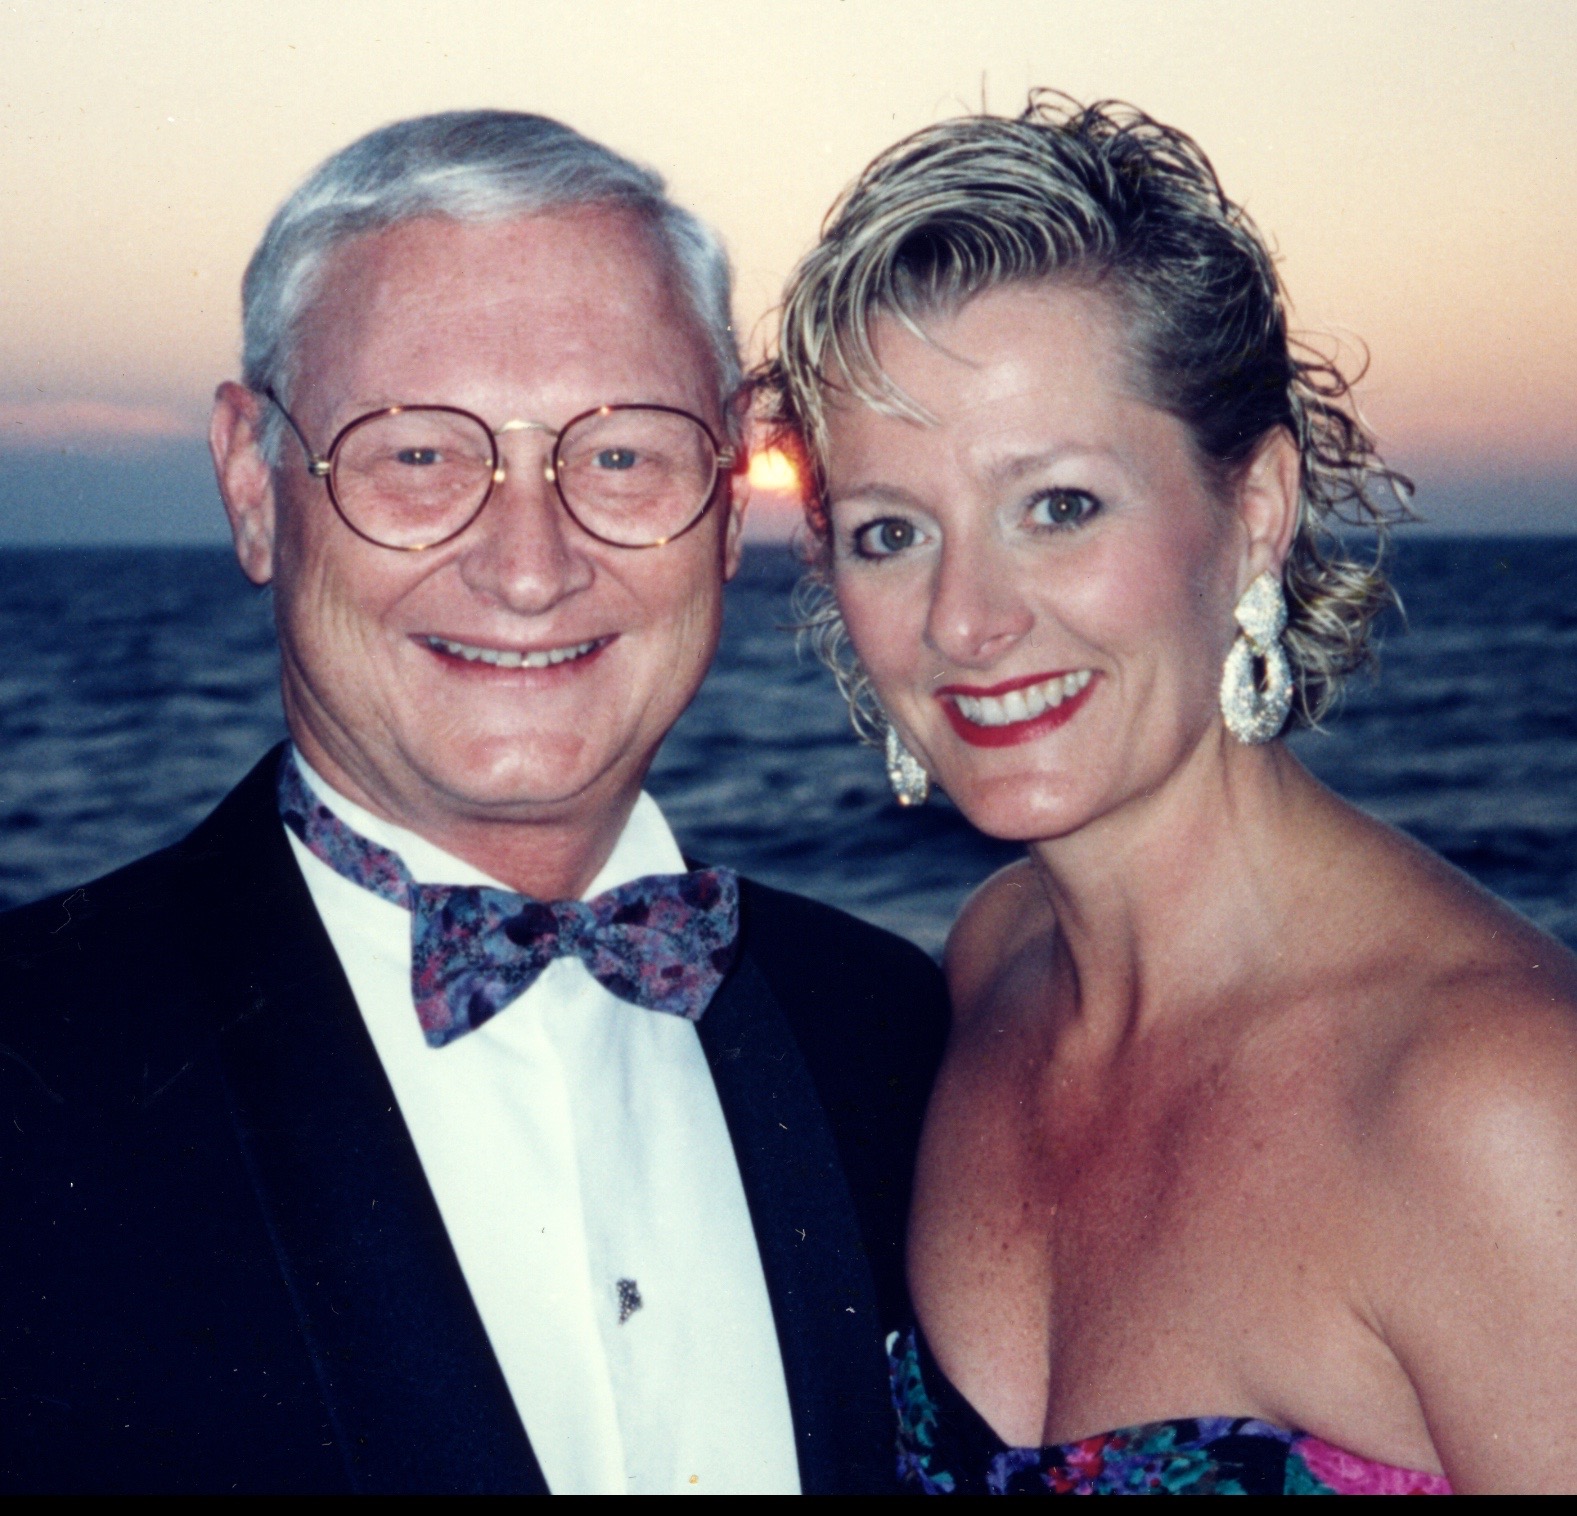 Gil and Beth Nickel, founders of Far Niente. Photo courtesy of Beth Nikel.